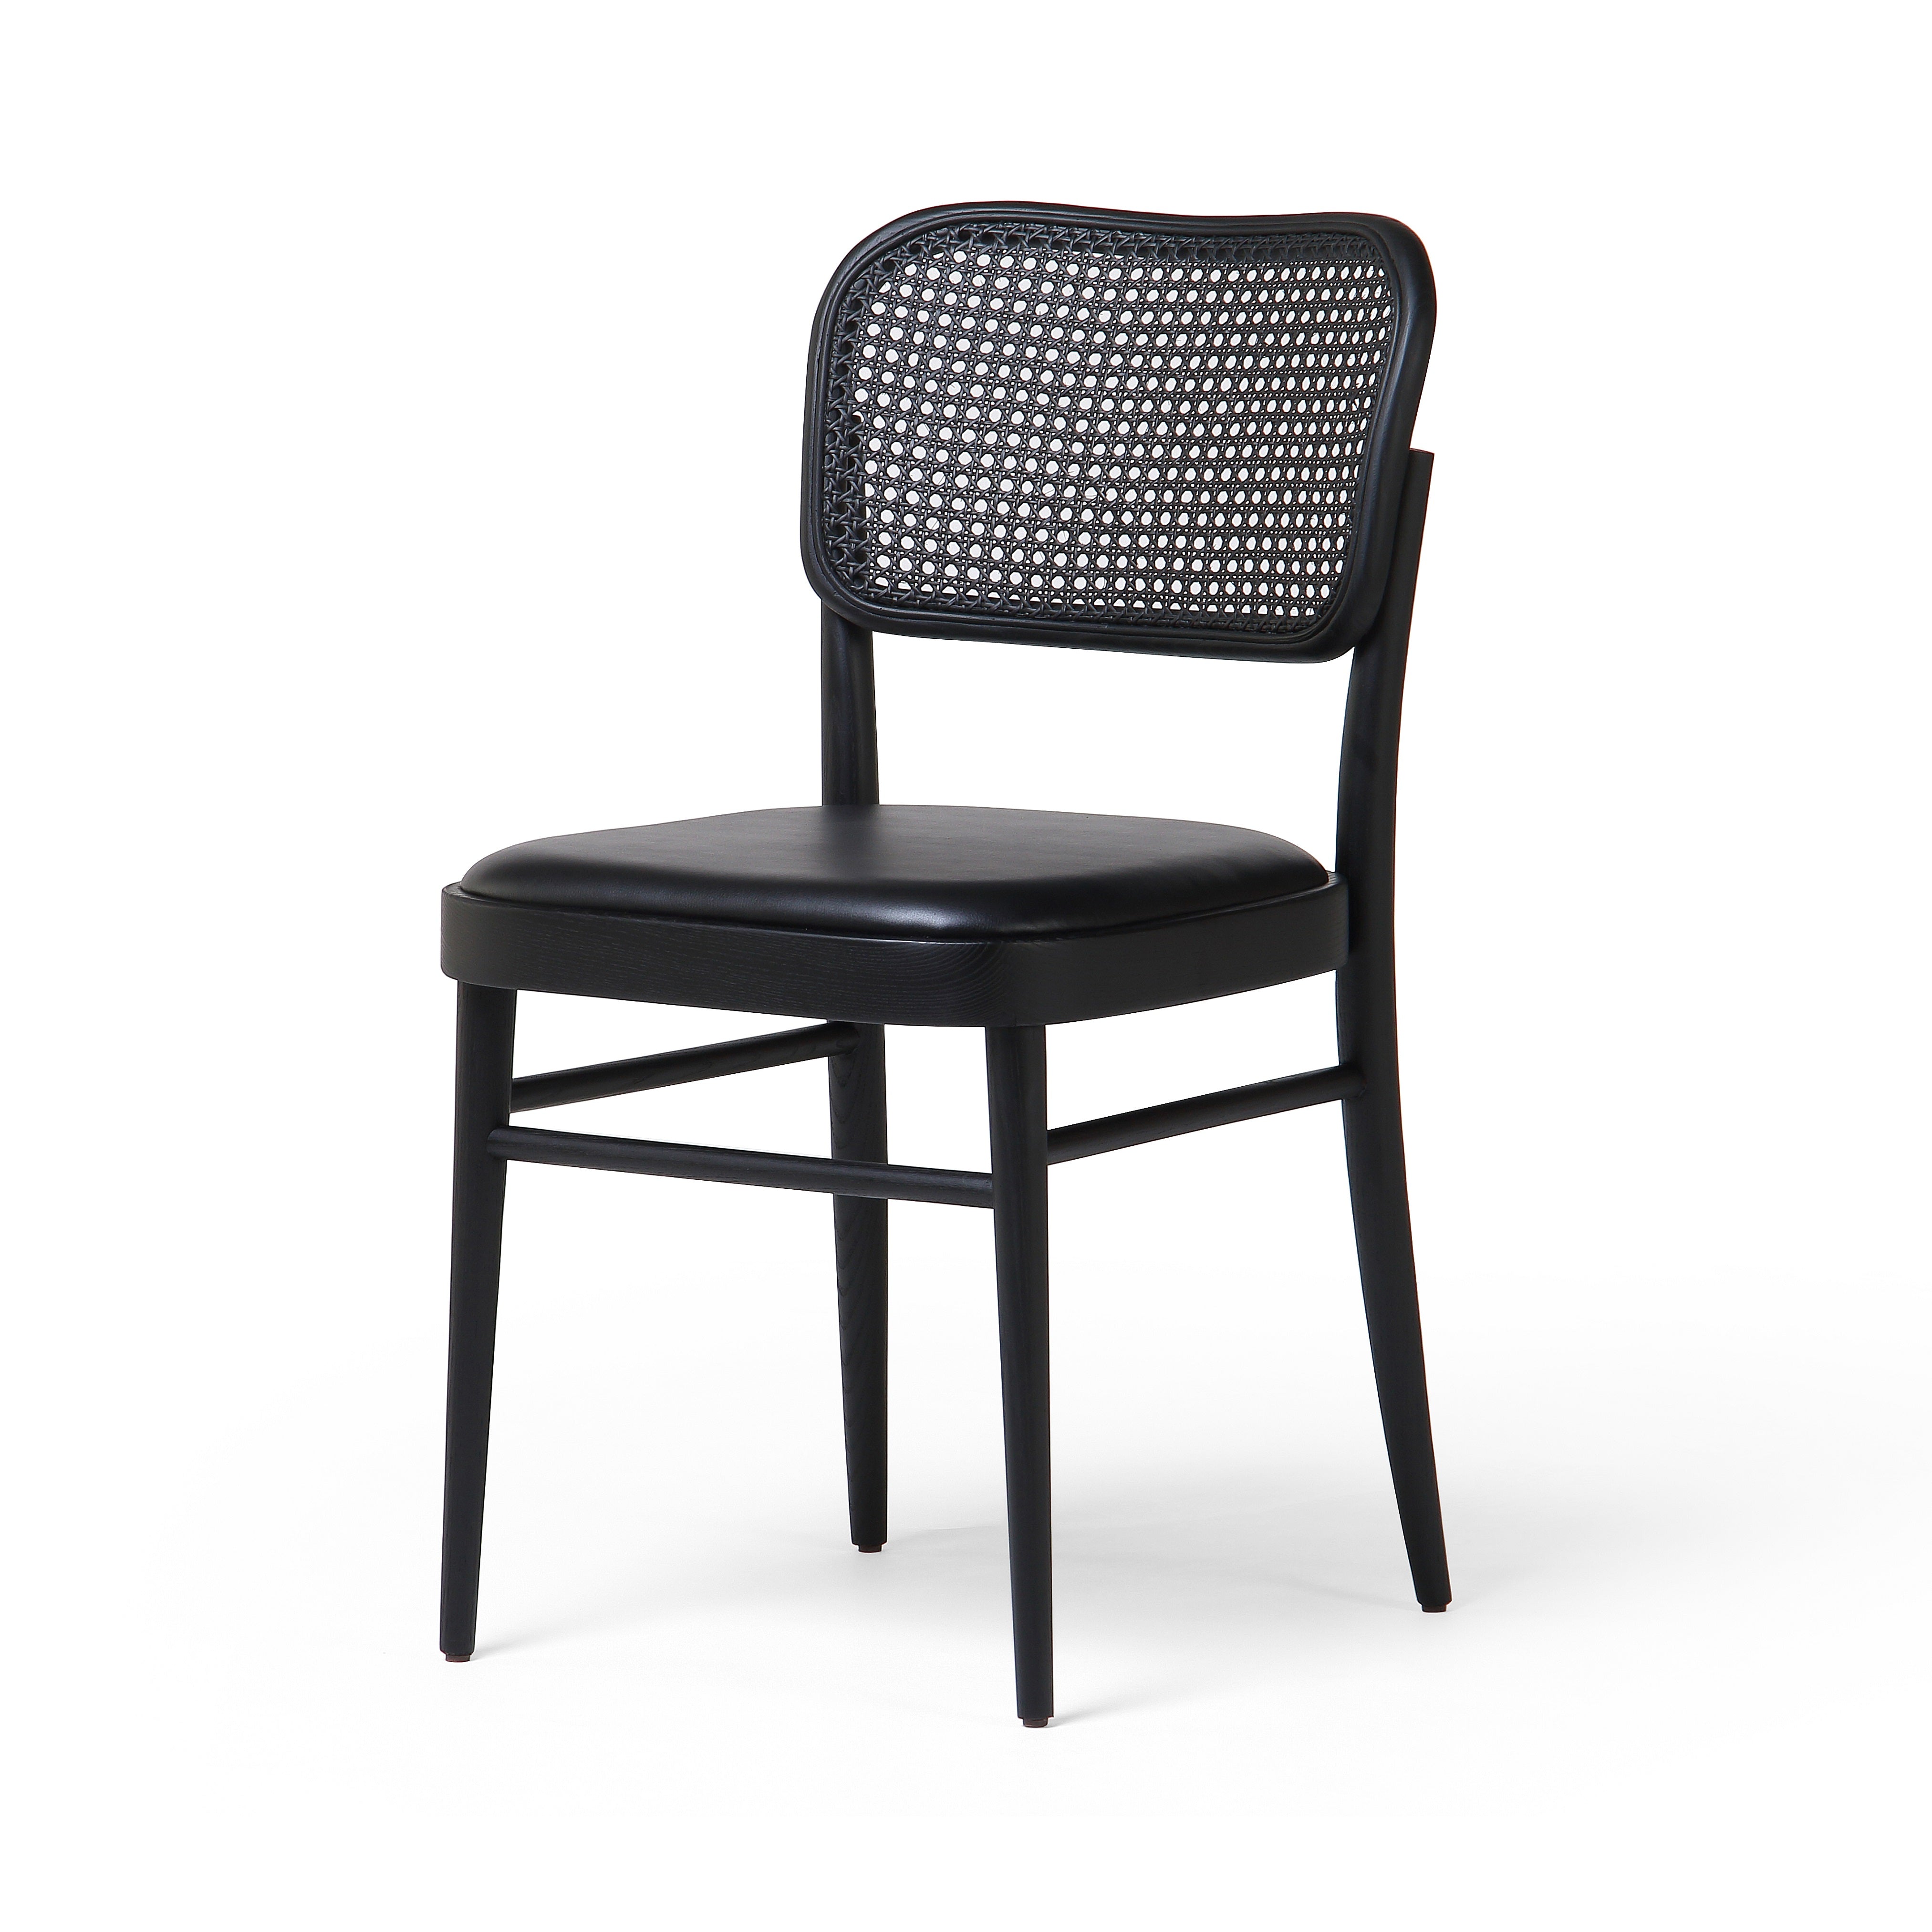 Inspired by the Thonet chair popularized in the mid-century, the Court Black Ash Dining Chair forms a simple but-shapely frame for black seating and a natural cane back. Amethyst Home provides interior design services, furniture, rugs, and lighting in the Dallas metro area.